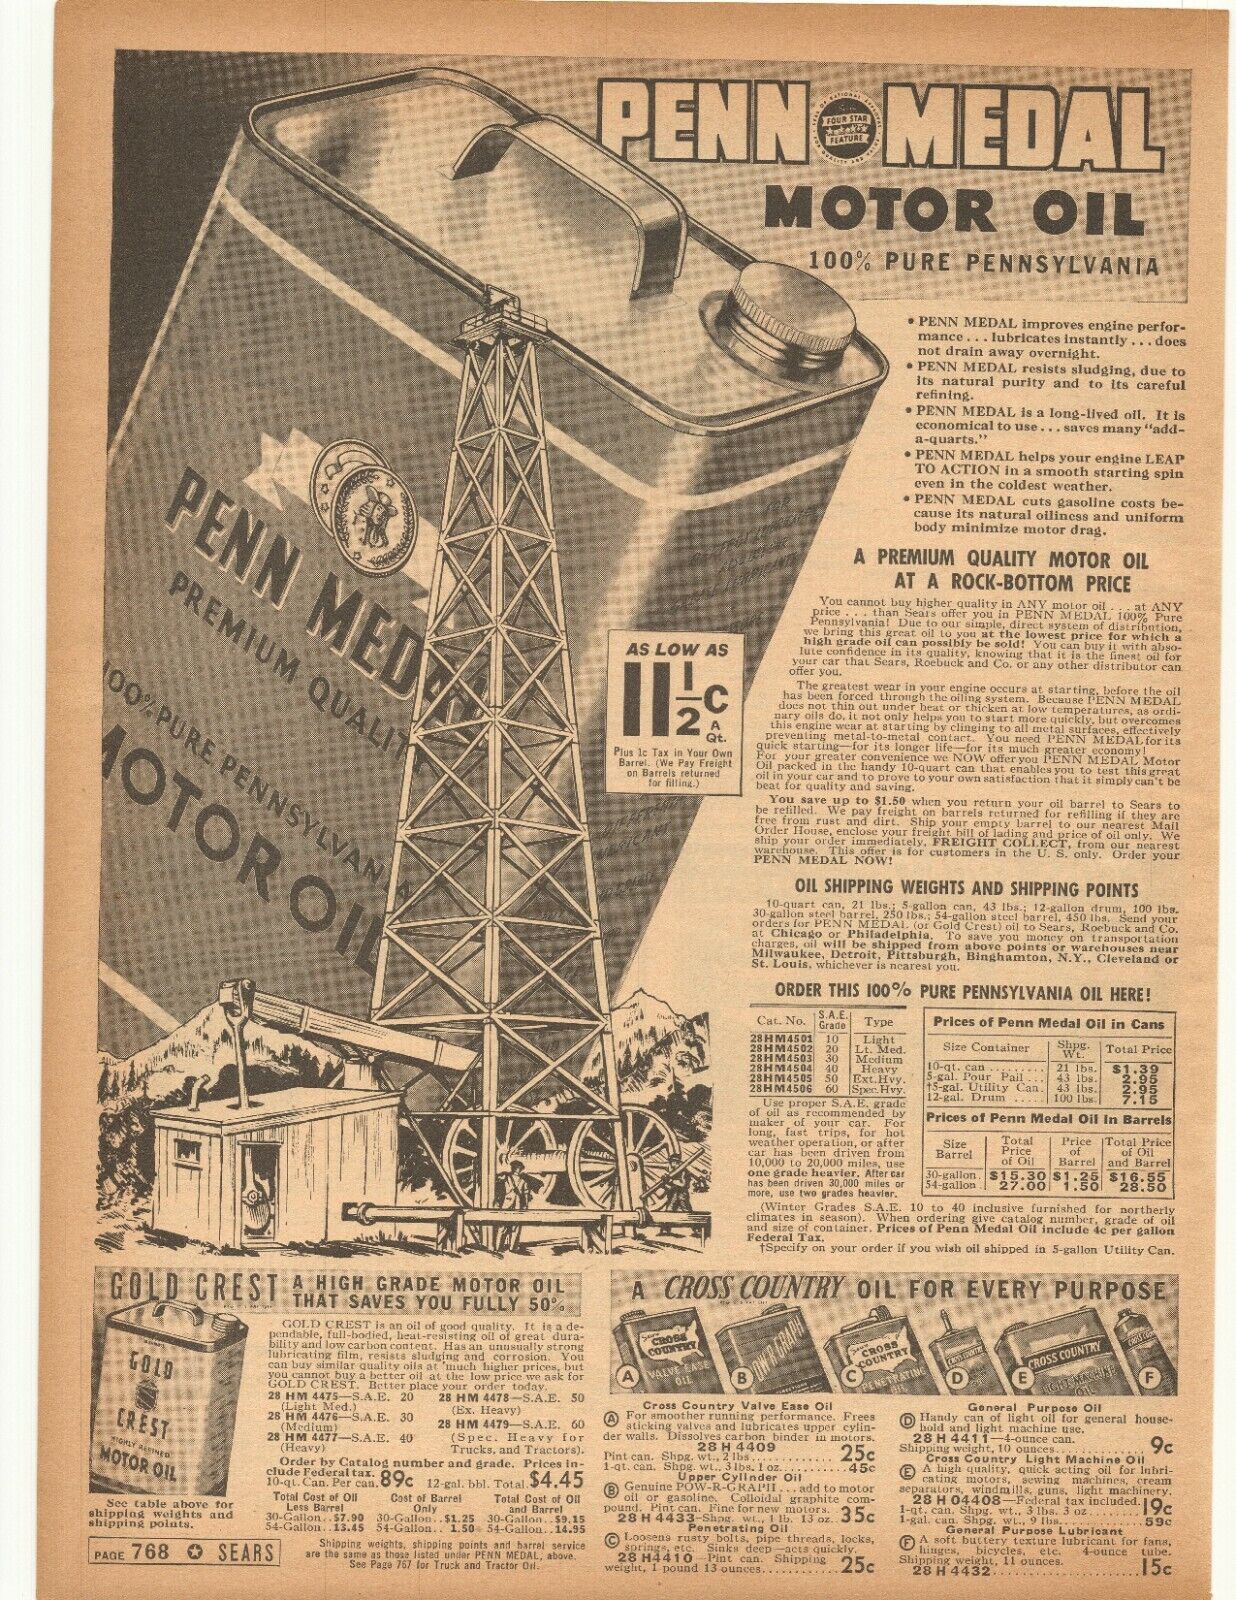 1938 Penn Medal Motor Oil, Gold Crest, Tractor Batteries Double Sided Sears Adve